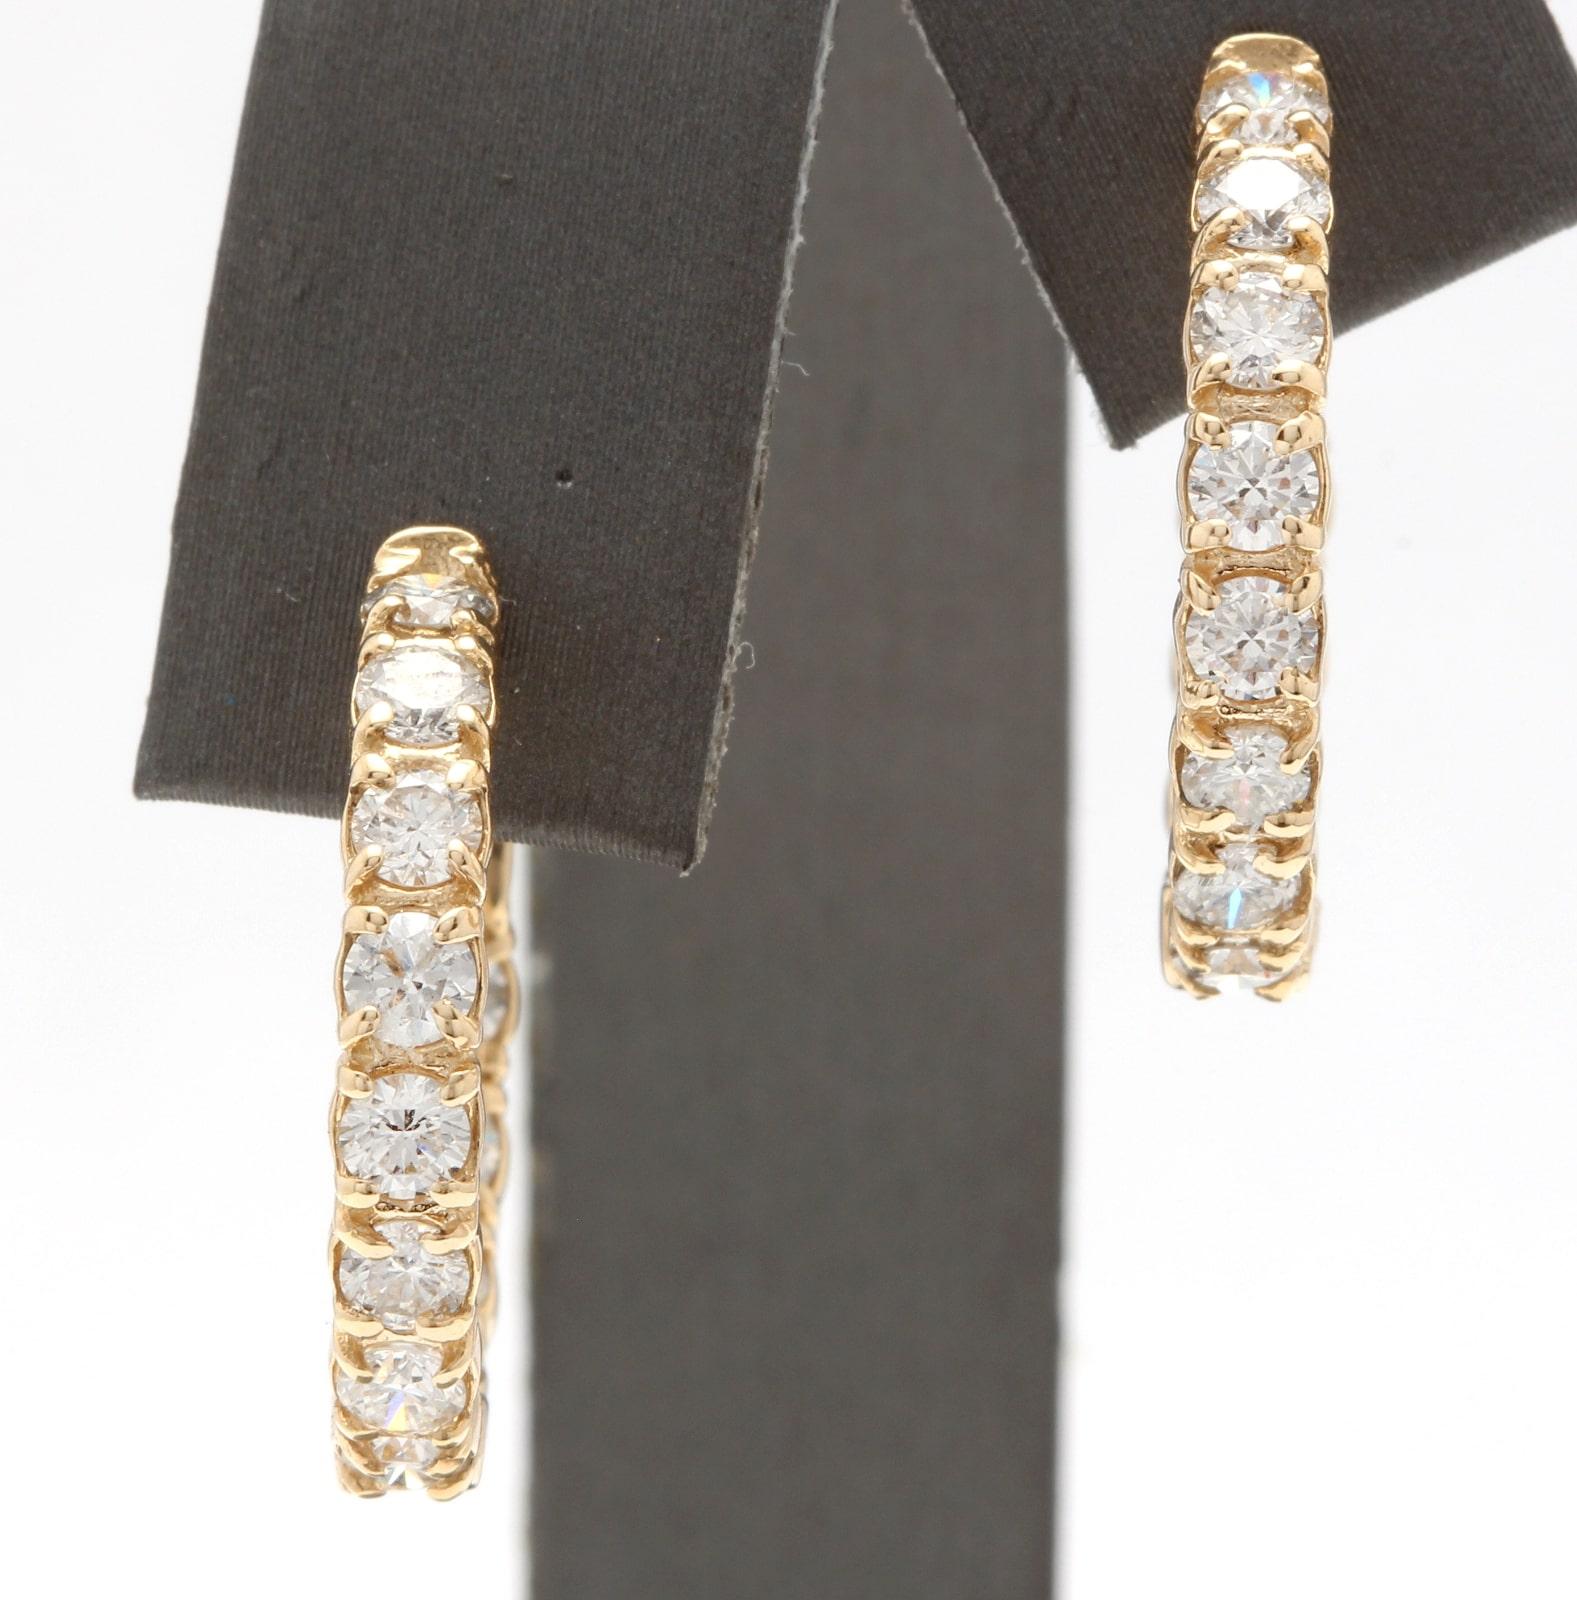 Exquisite 3.25 Carats Natural Diamond 14K Solid Yellow Gold Hoop Earrings

Amazing looking piece!

Inside Out Diamonds.

Earrings have a safety lock.

Total Natural Round Cut White Diamonds Weight: Approx. 3.25 Carats (color G-H / Clarity